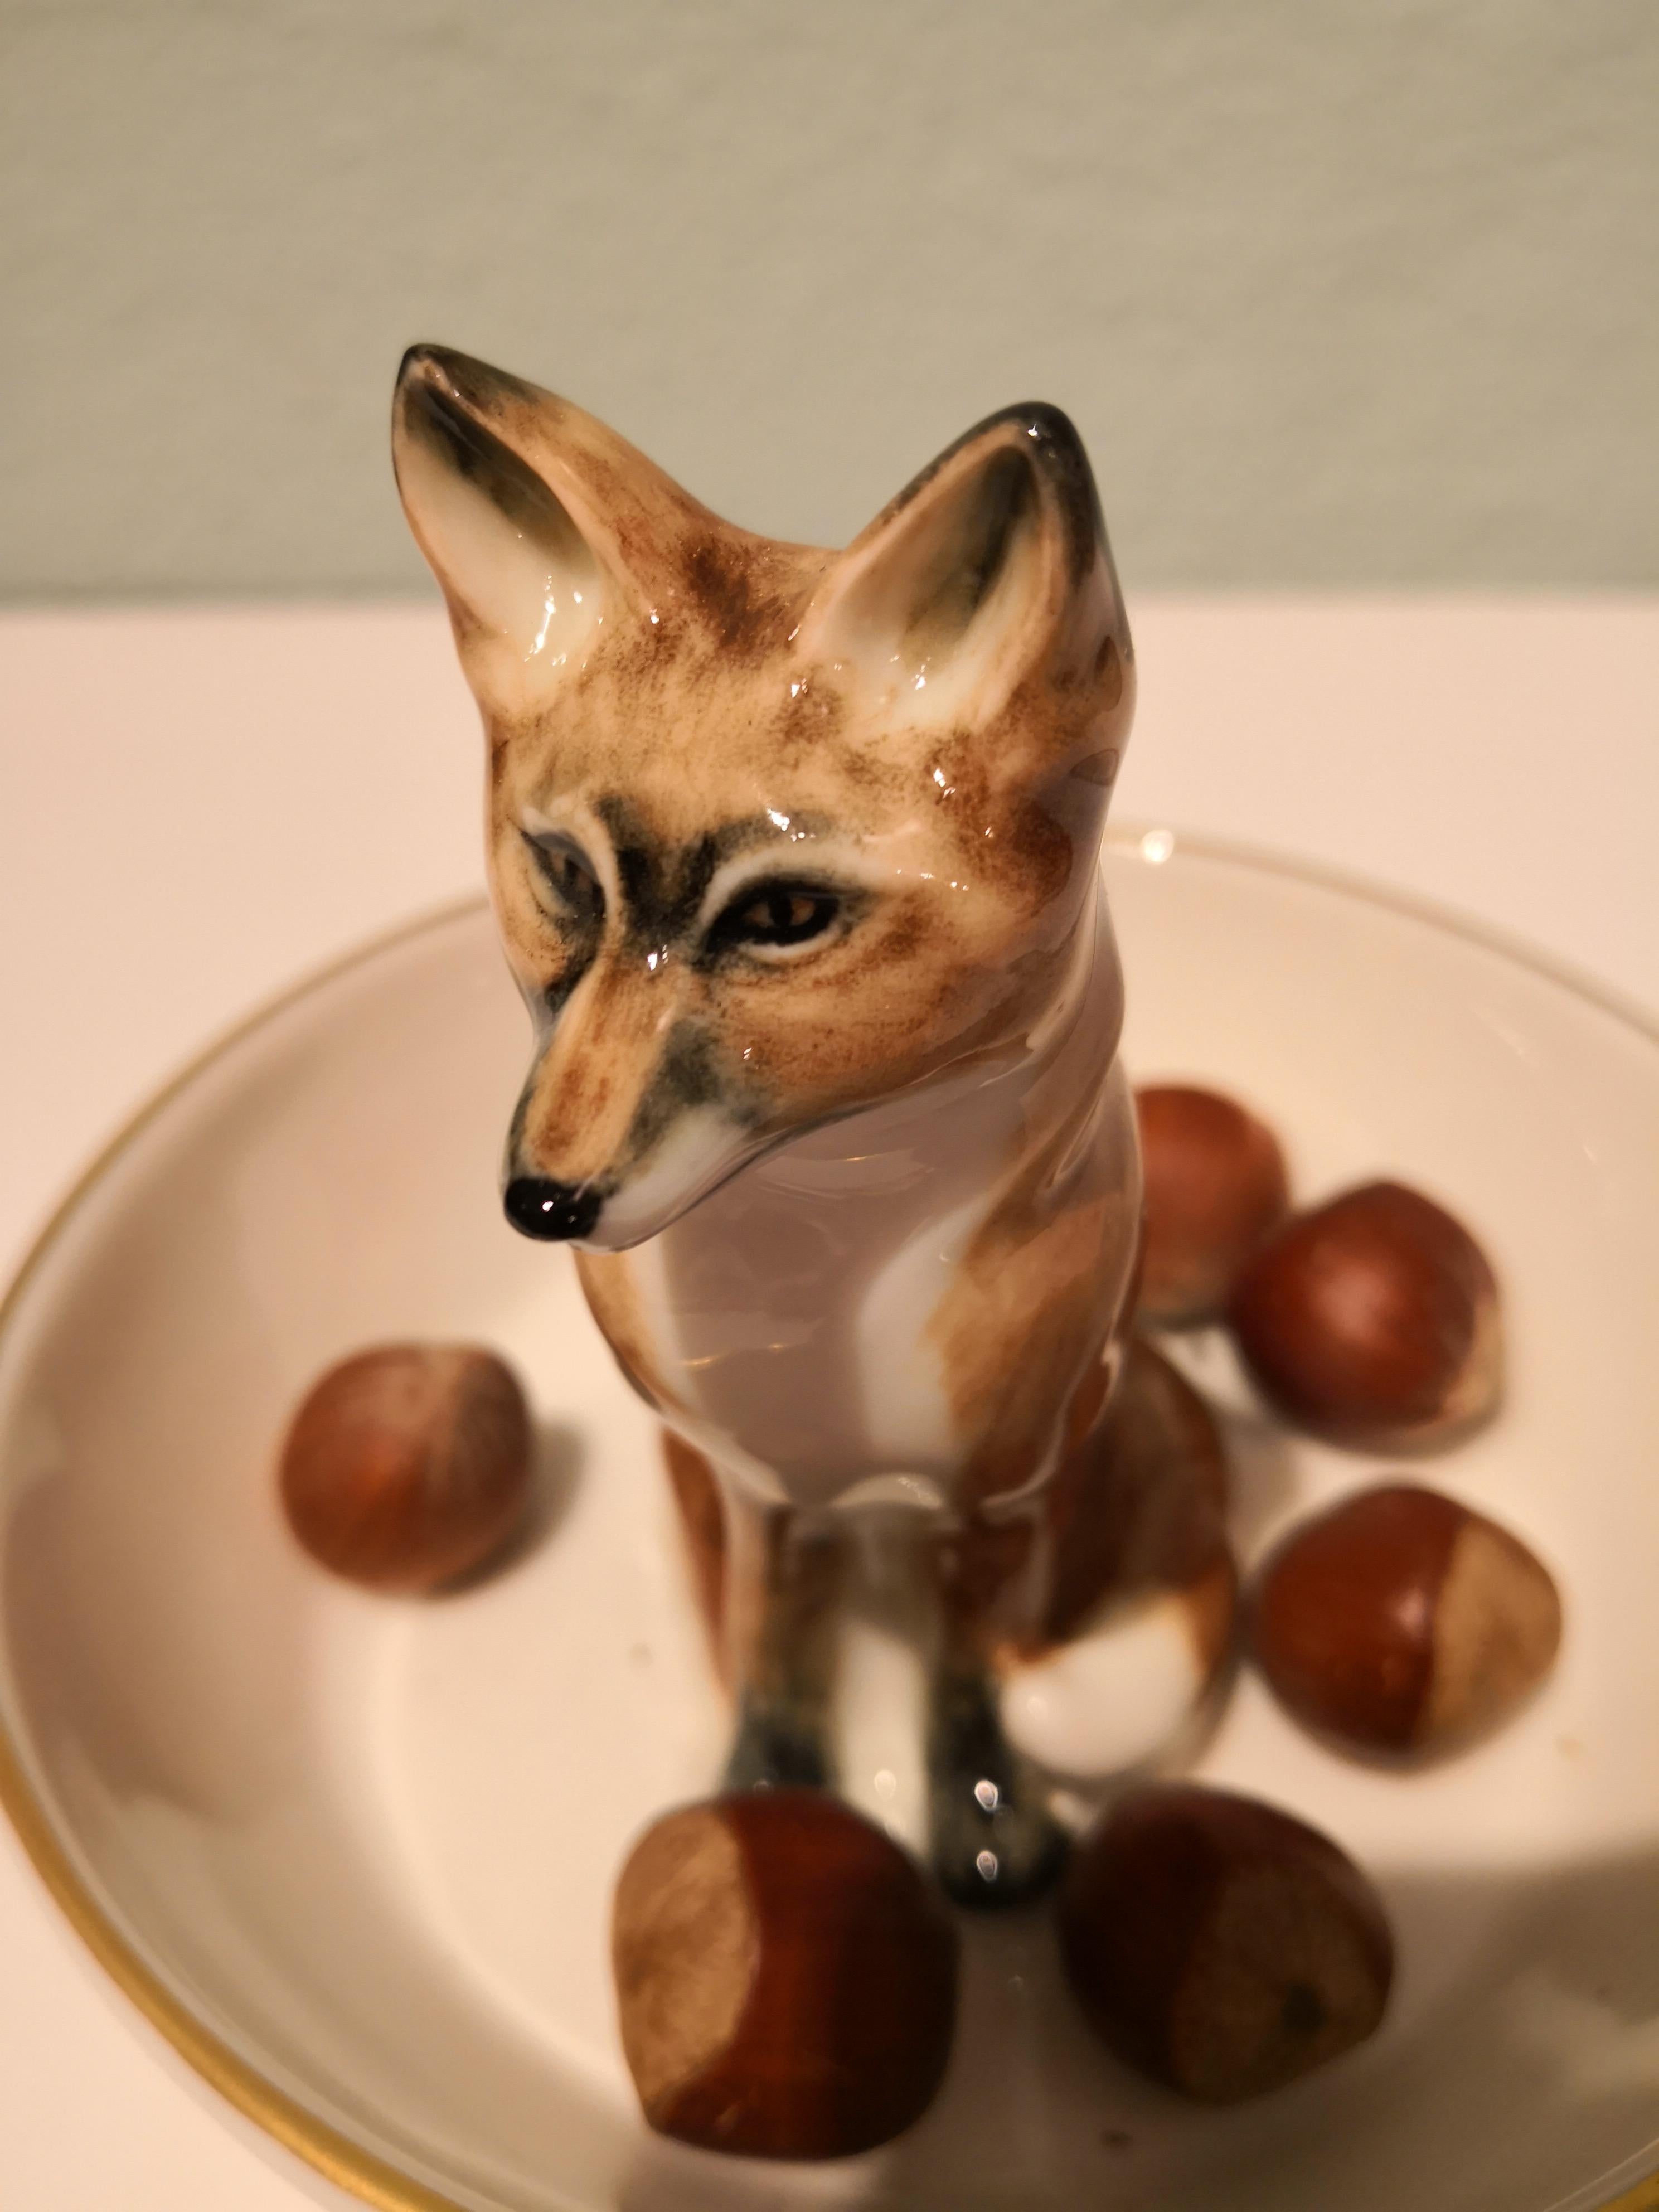 Completely handmade porcelain bowl with a hands-free naturalistic painted fox figure in brown colors. The fox is sitting in the middle of the bowl for decorating nuts or sweets around for a great black forest interior style. Rimmed with a fine